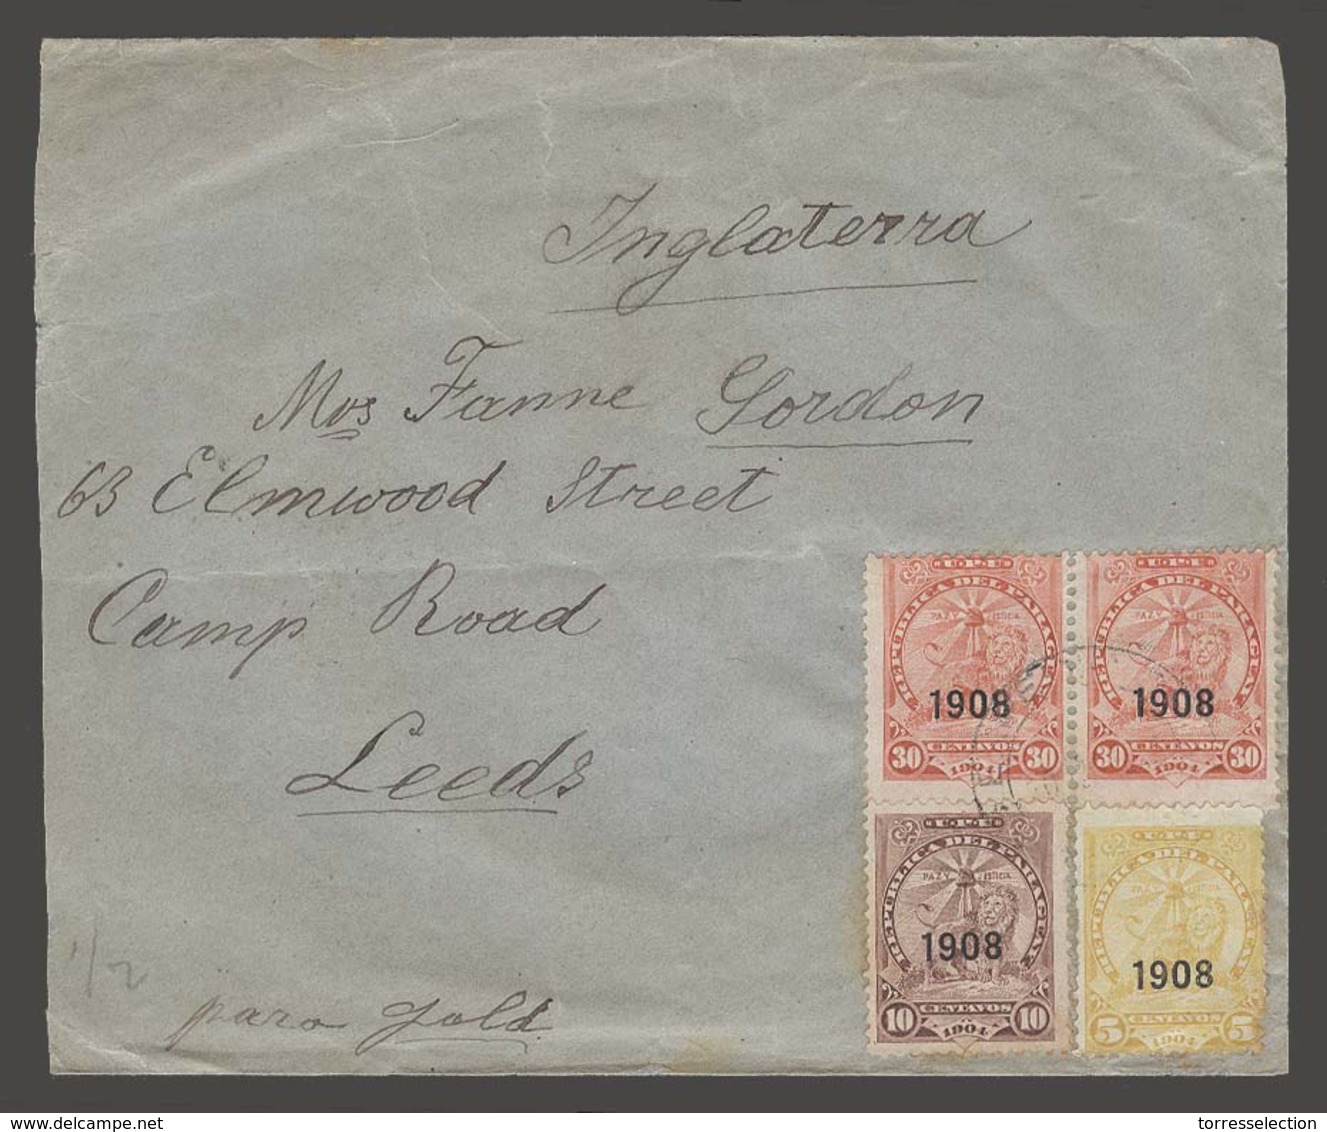 PARAGUAY. 1909 (10 April). Asuncion - UK / Leeds (7 May). Multifkd Env 75c Rate 1908 Ovptd Issue Cds. Fine. - Paraguay